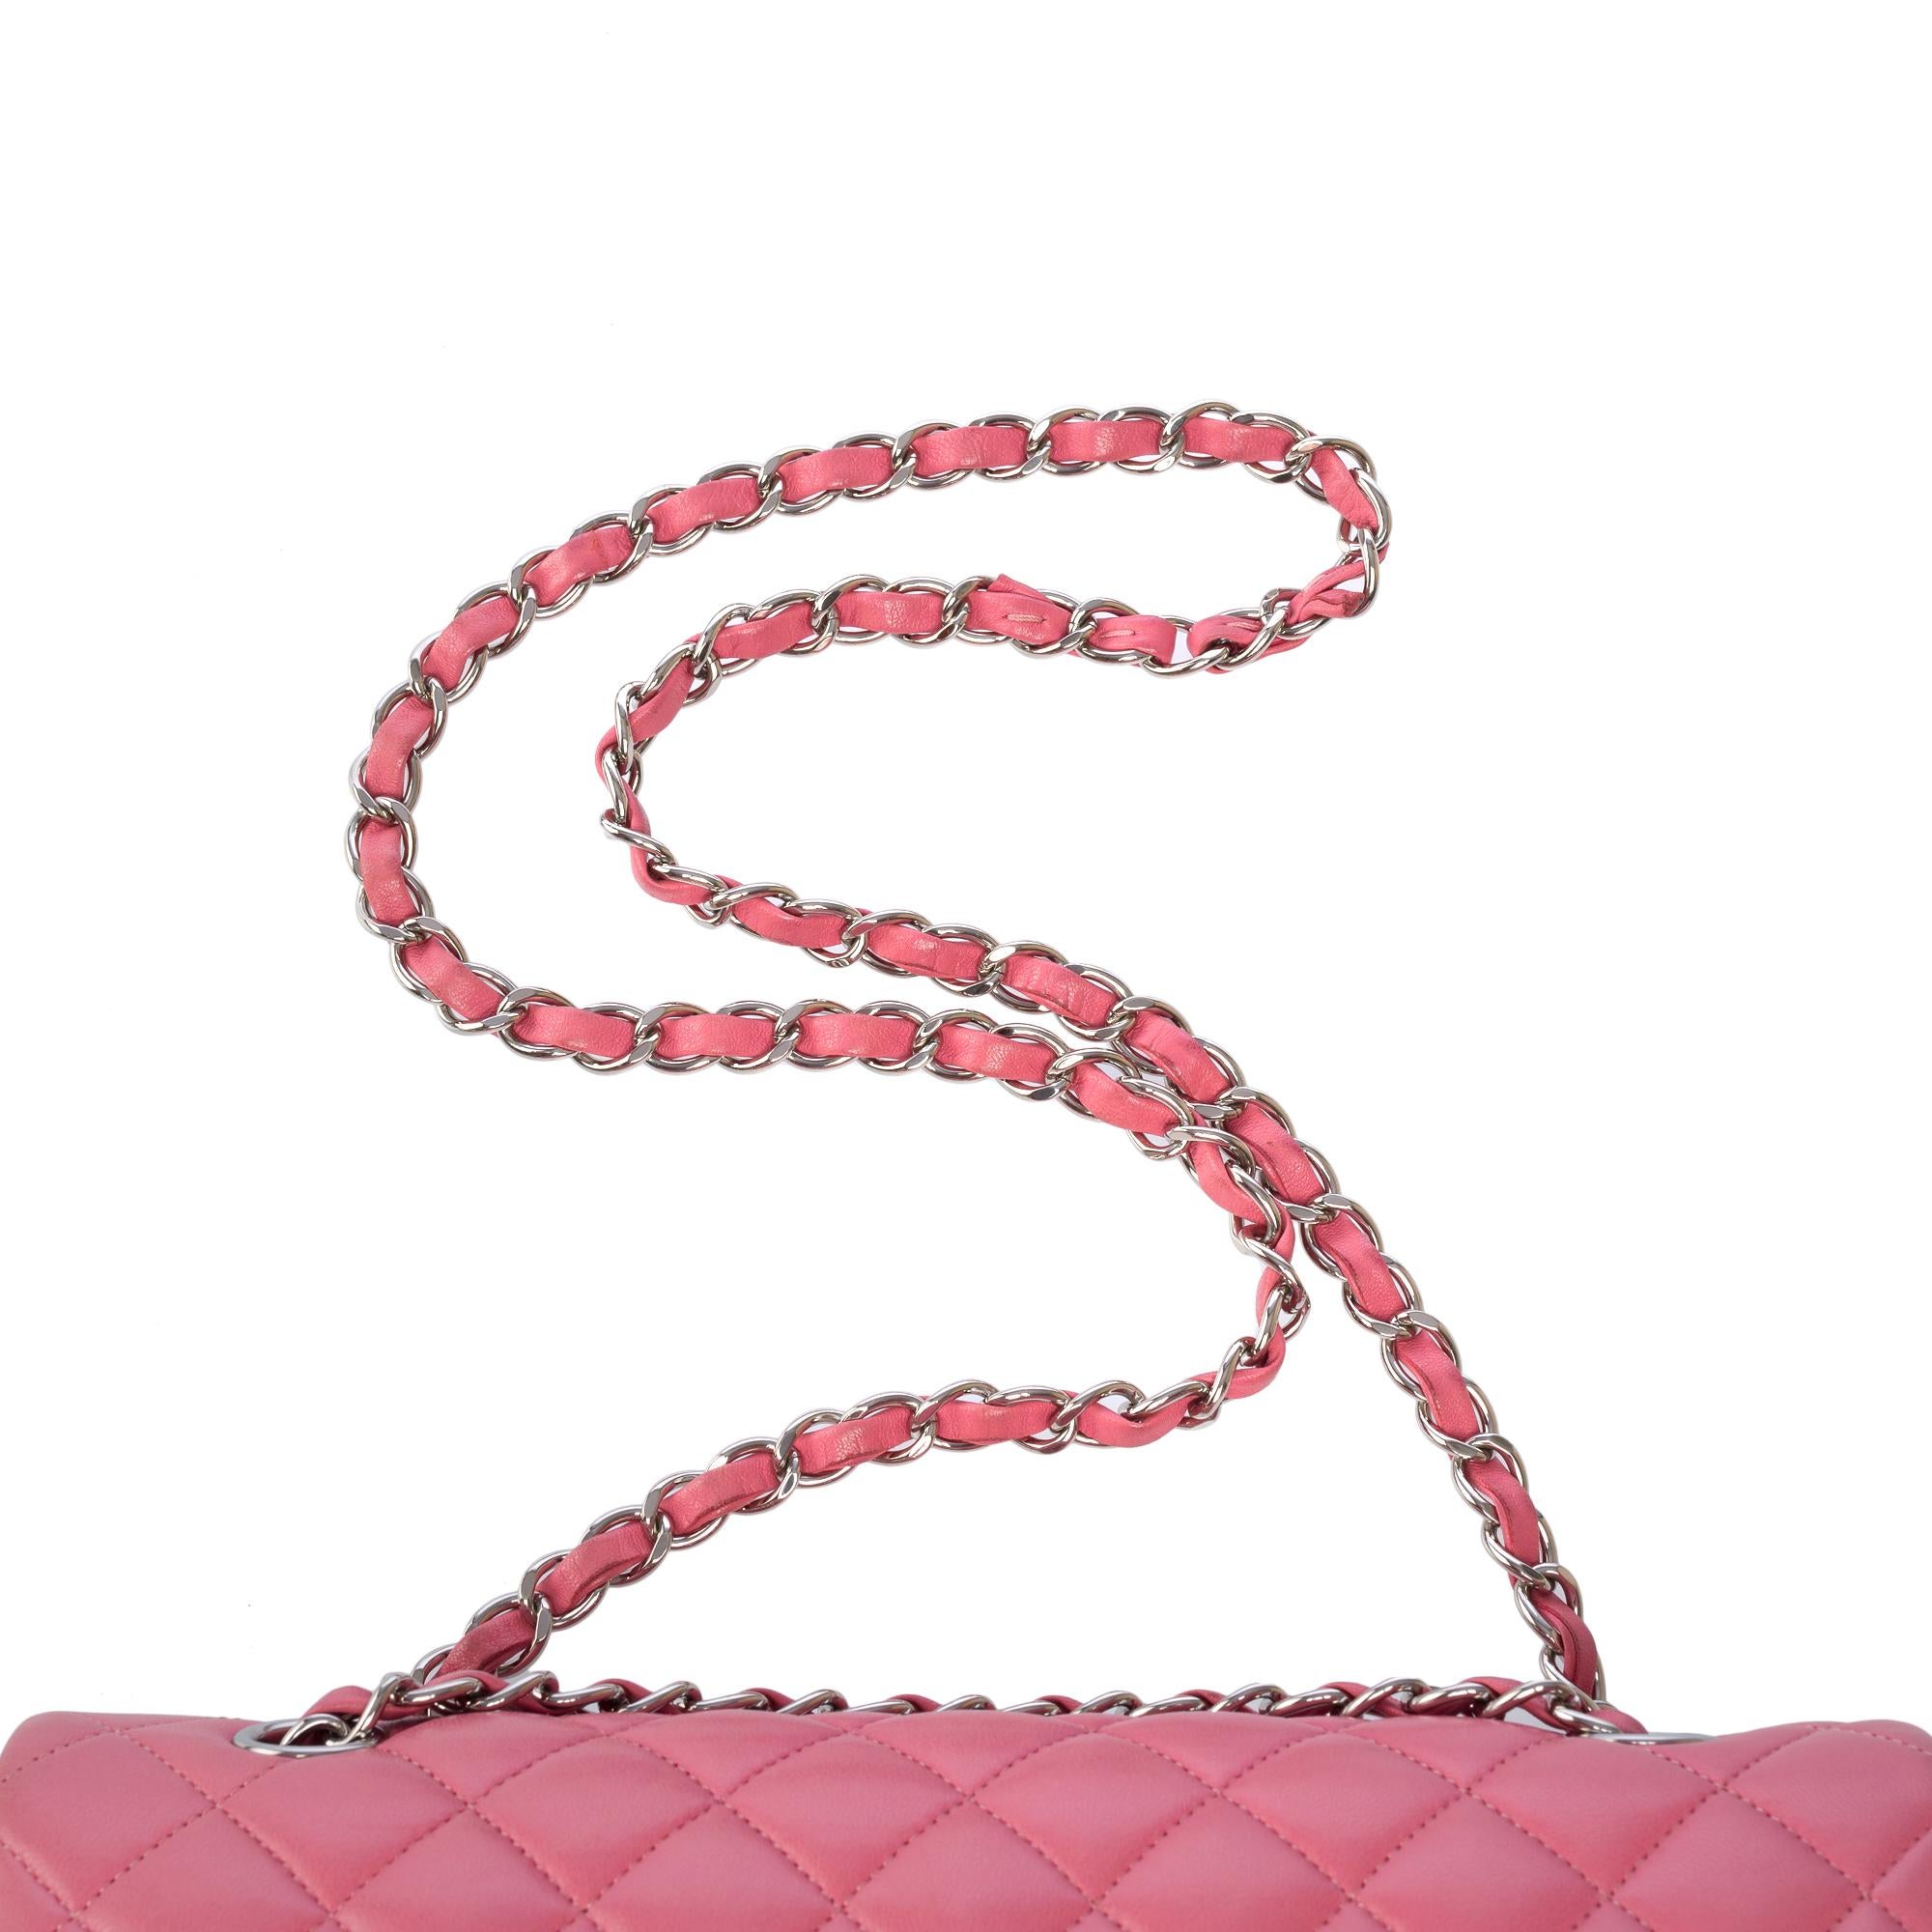 Chanel Timeless double flap shoulder bag in Pink quilted lambskin leather, SHW For Sale 6